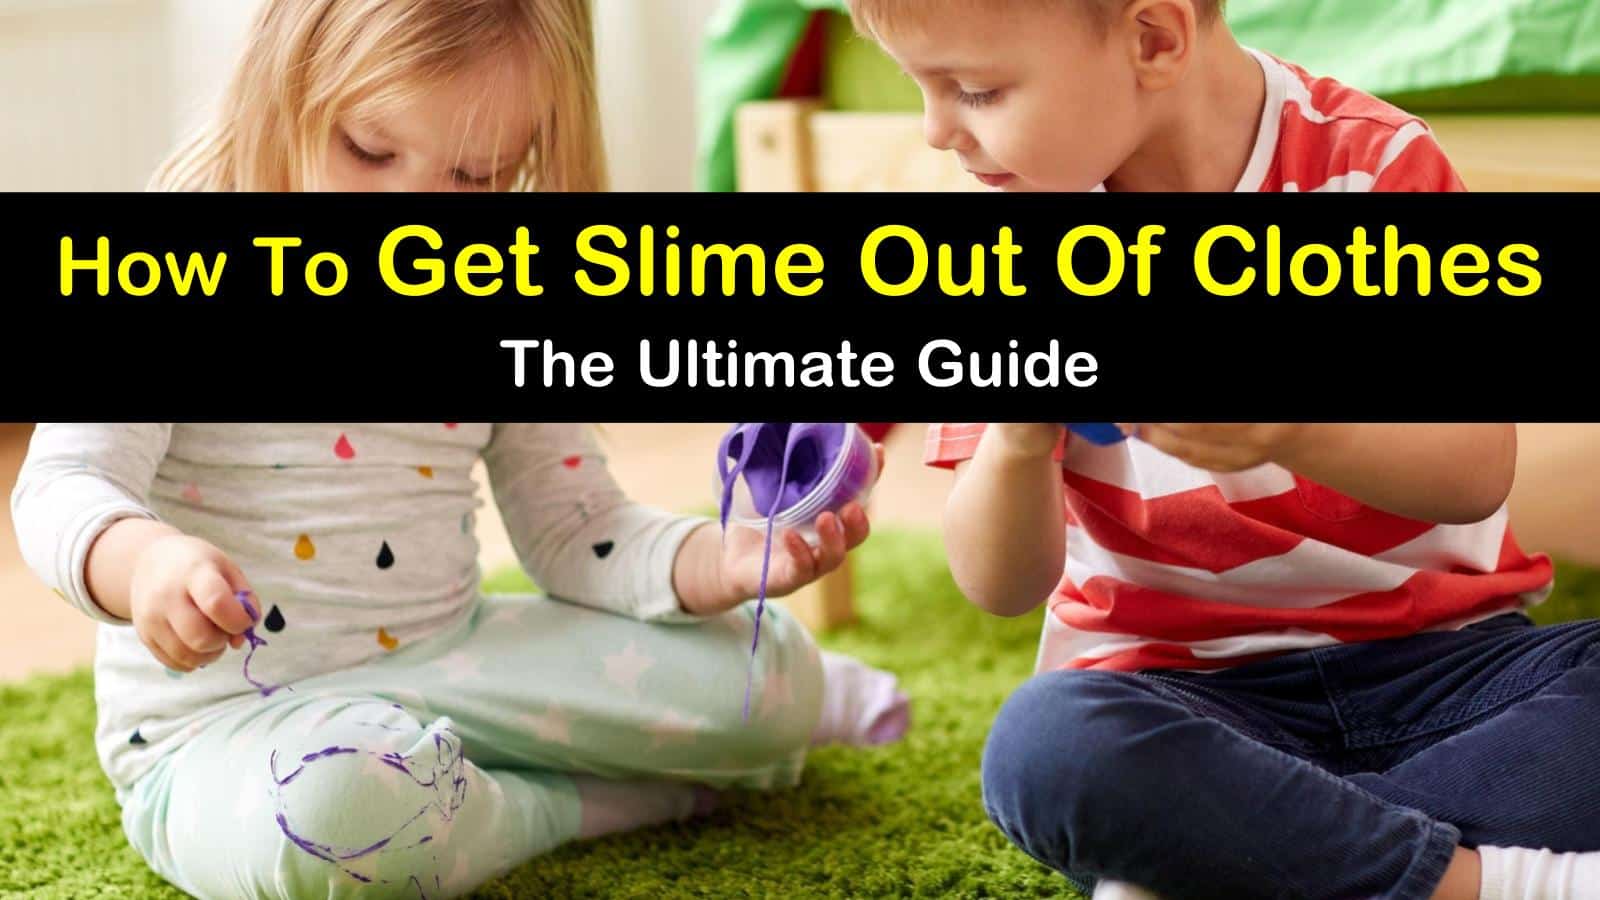 how to get slime out of clothes titleimg1